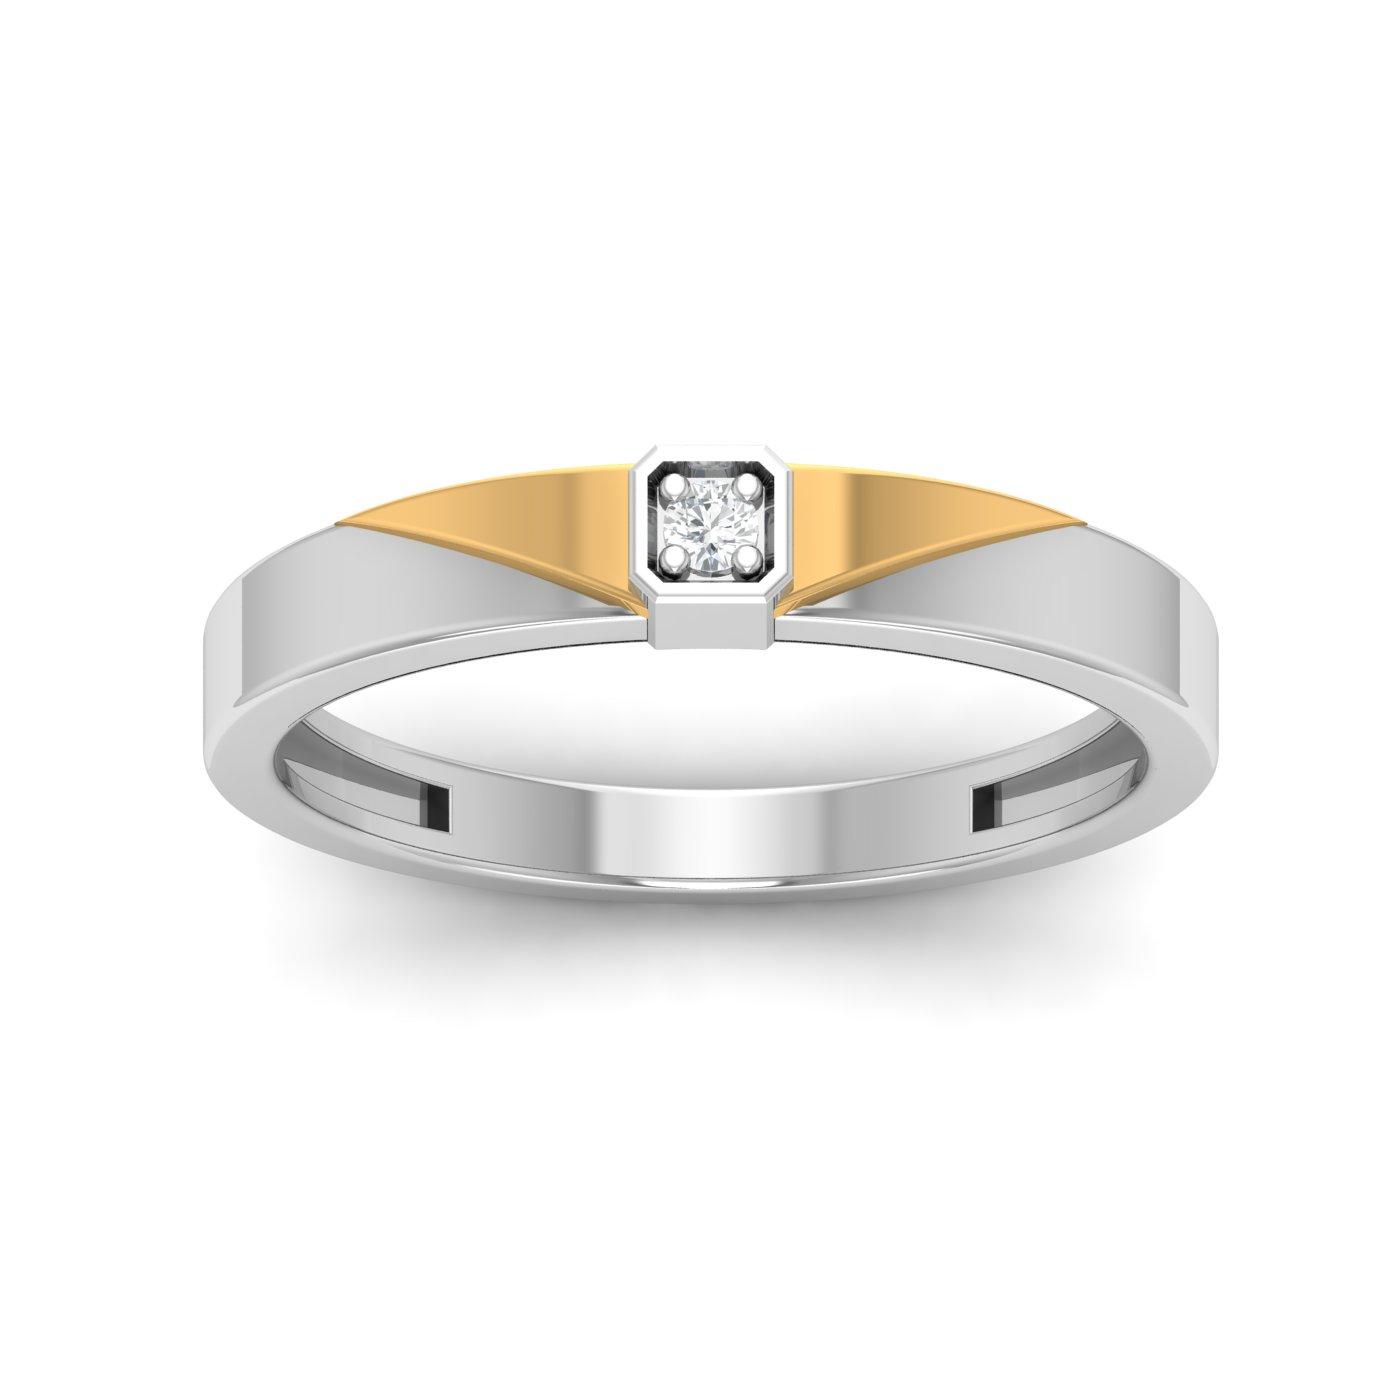 Engagement Rings Made of White Gold | White gold square diamond ring